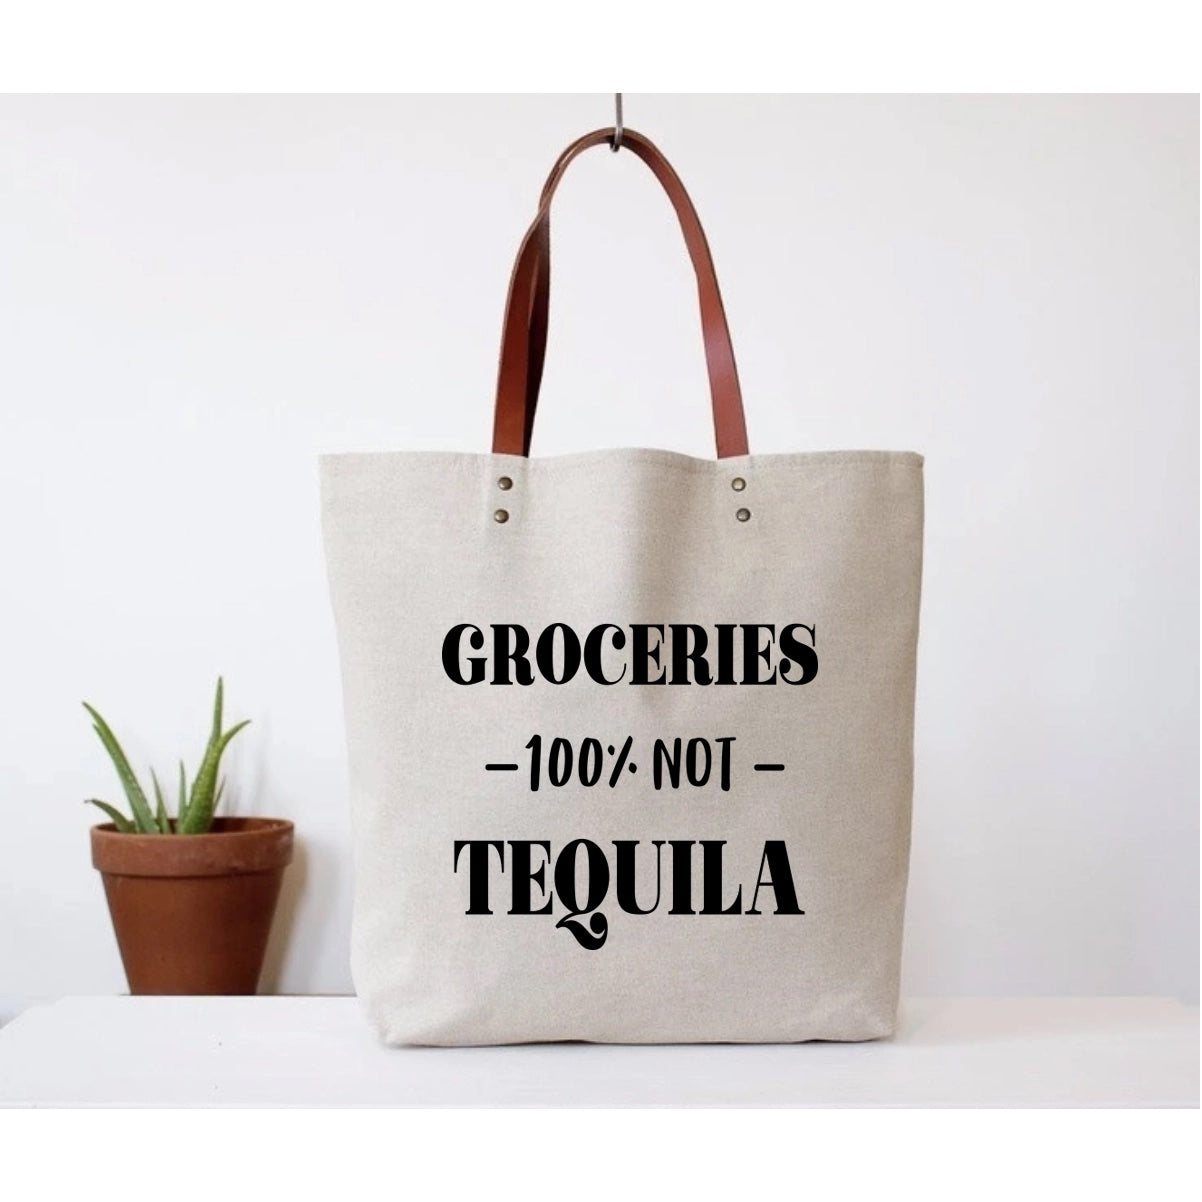 Canvas tote bag with faux leather straps that says "Groceries -100% NOT -Tequila"